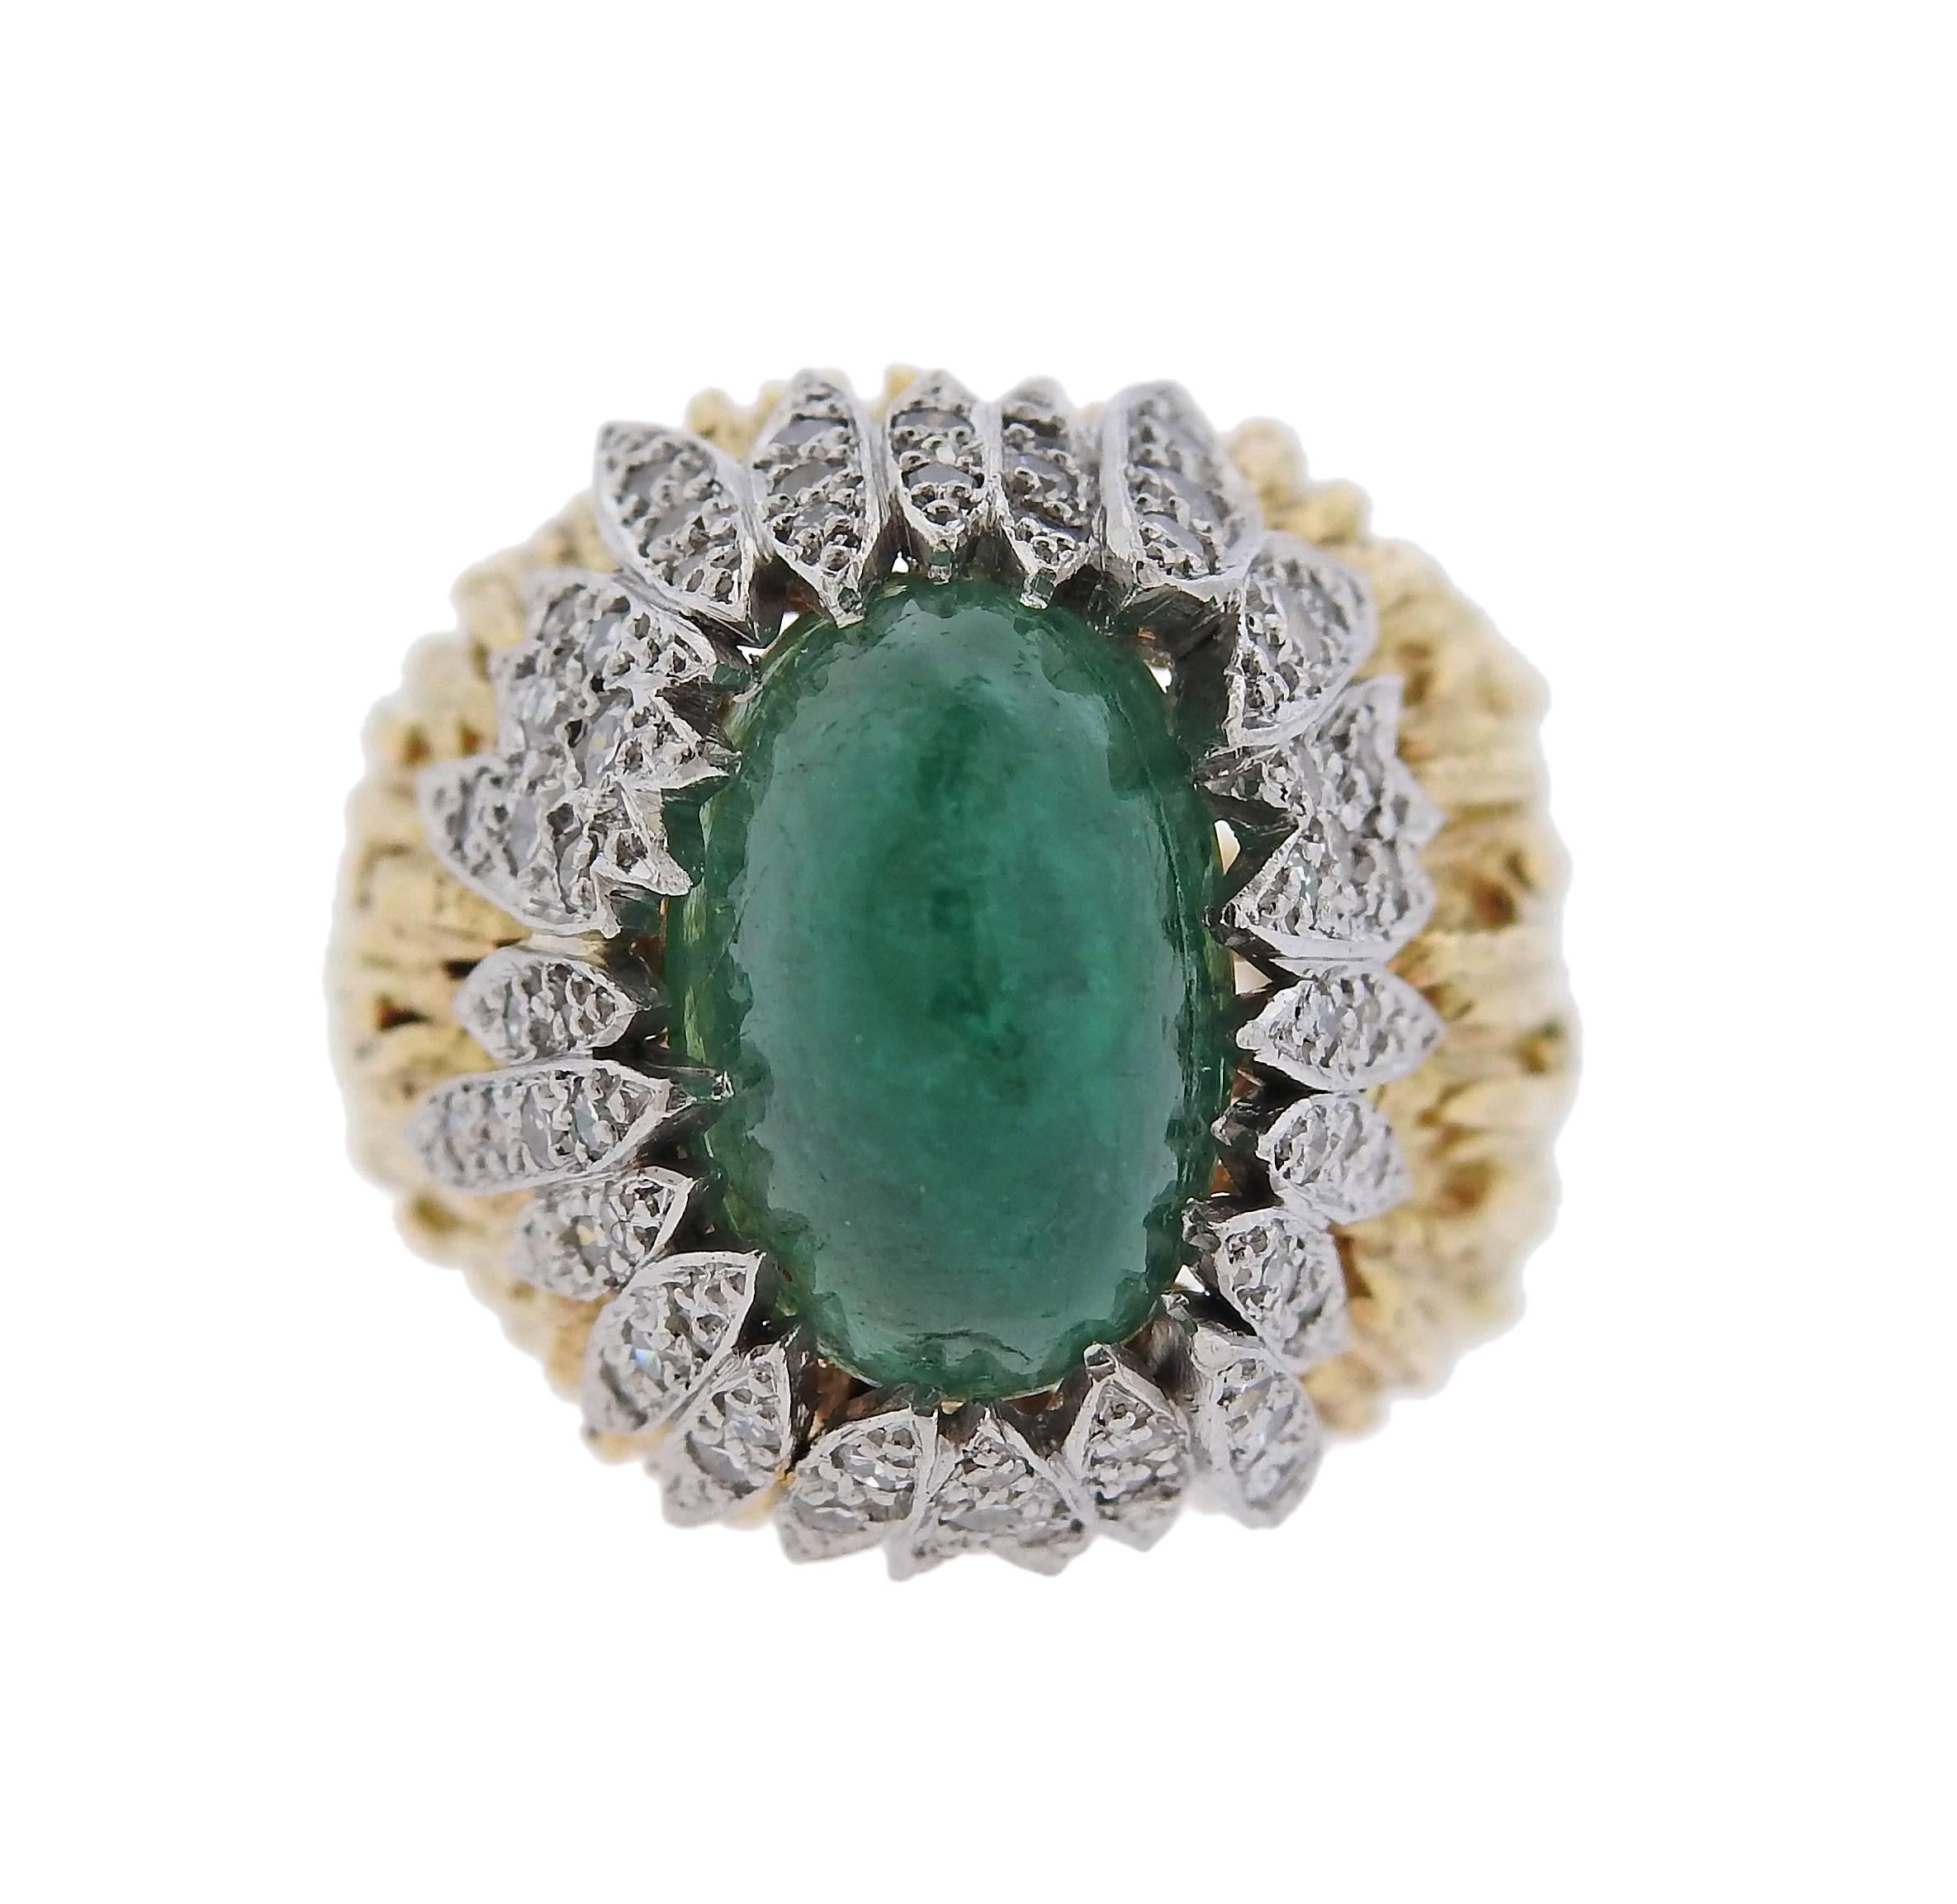 An 18k gold ring, crafted by Andrew Grima, set with an approximately 6ct emerald cabochon, surrounded with 0.36ctw in diamonds. Ring size - 5, ring top is 19mm x 20mm, sits approx. 19mm from the top of the finger. Marked Grima. Weight of the piece -